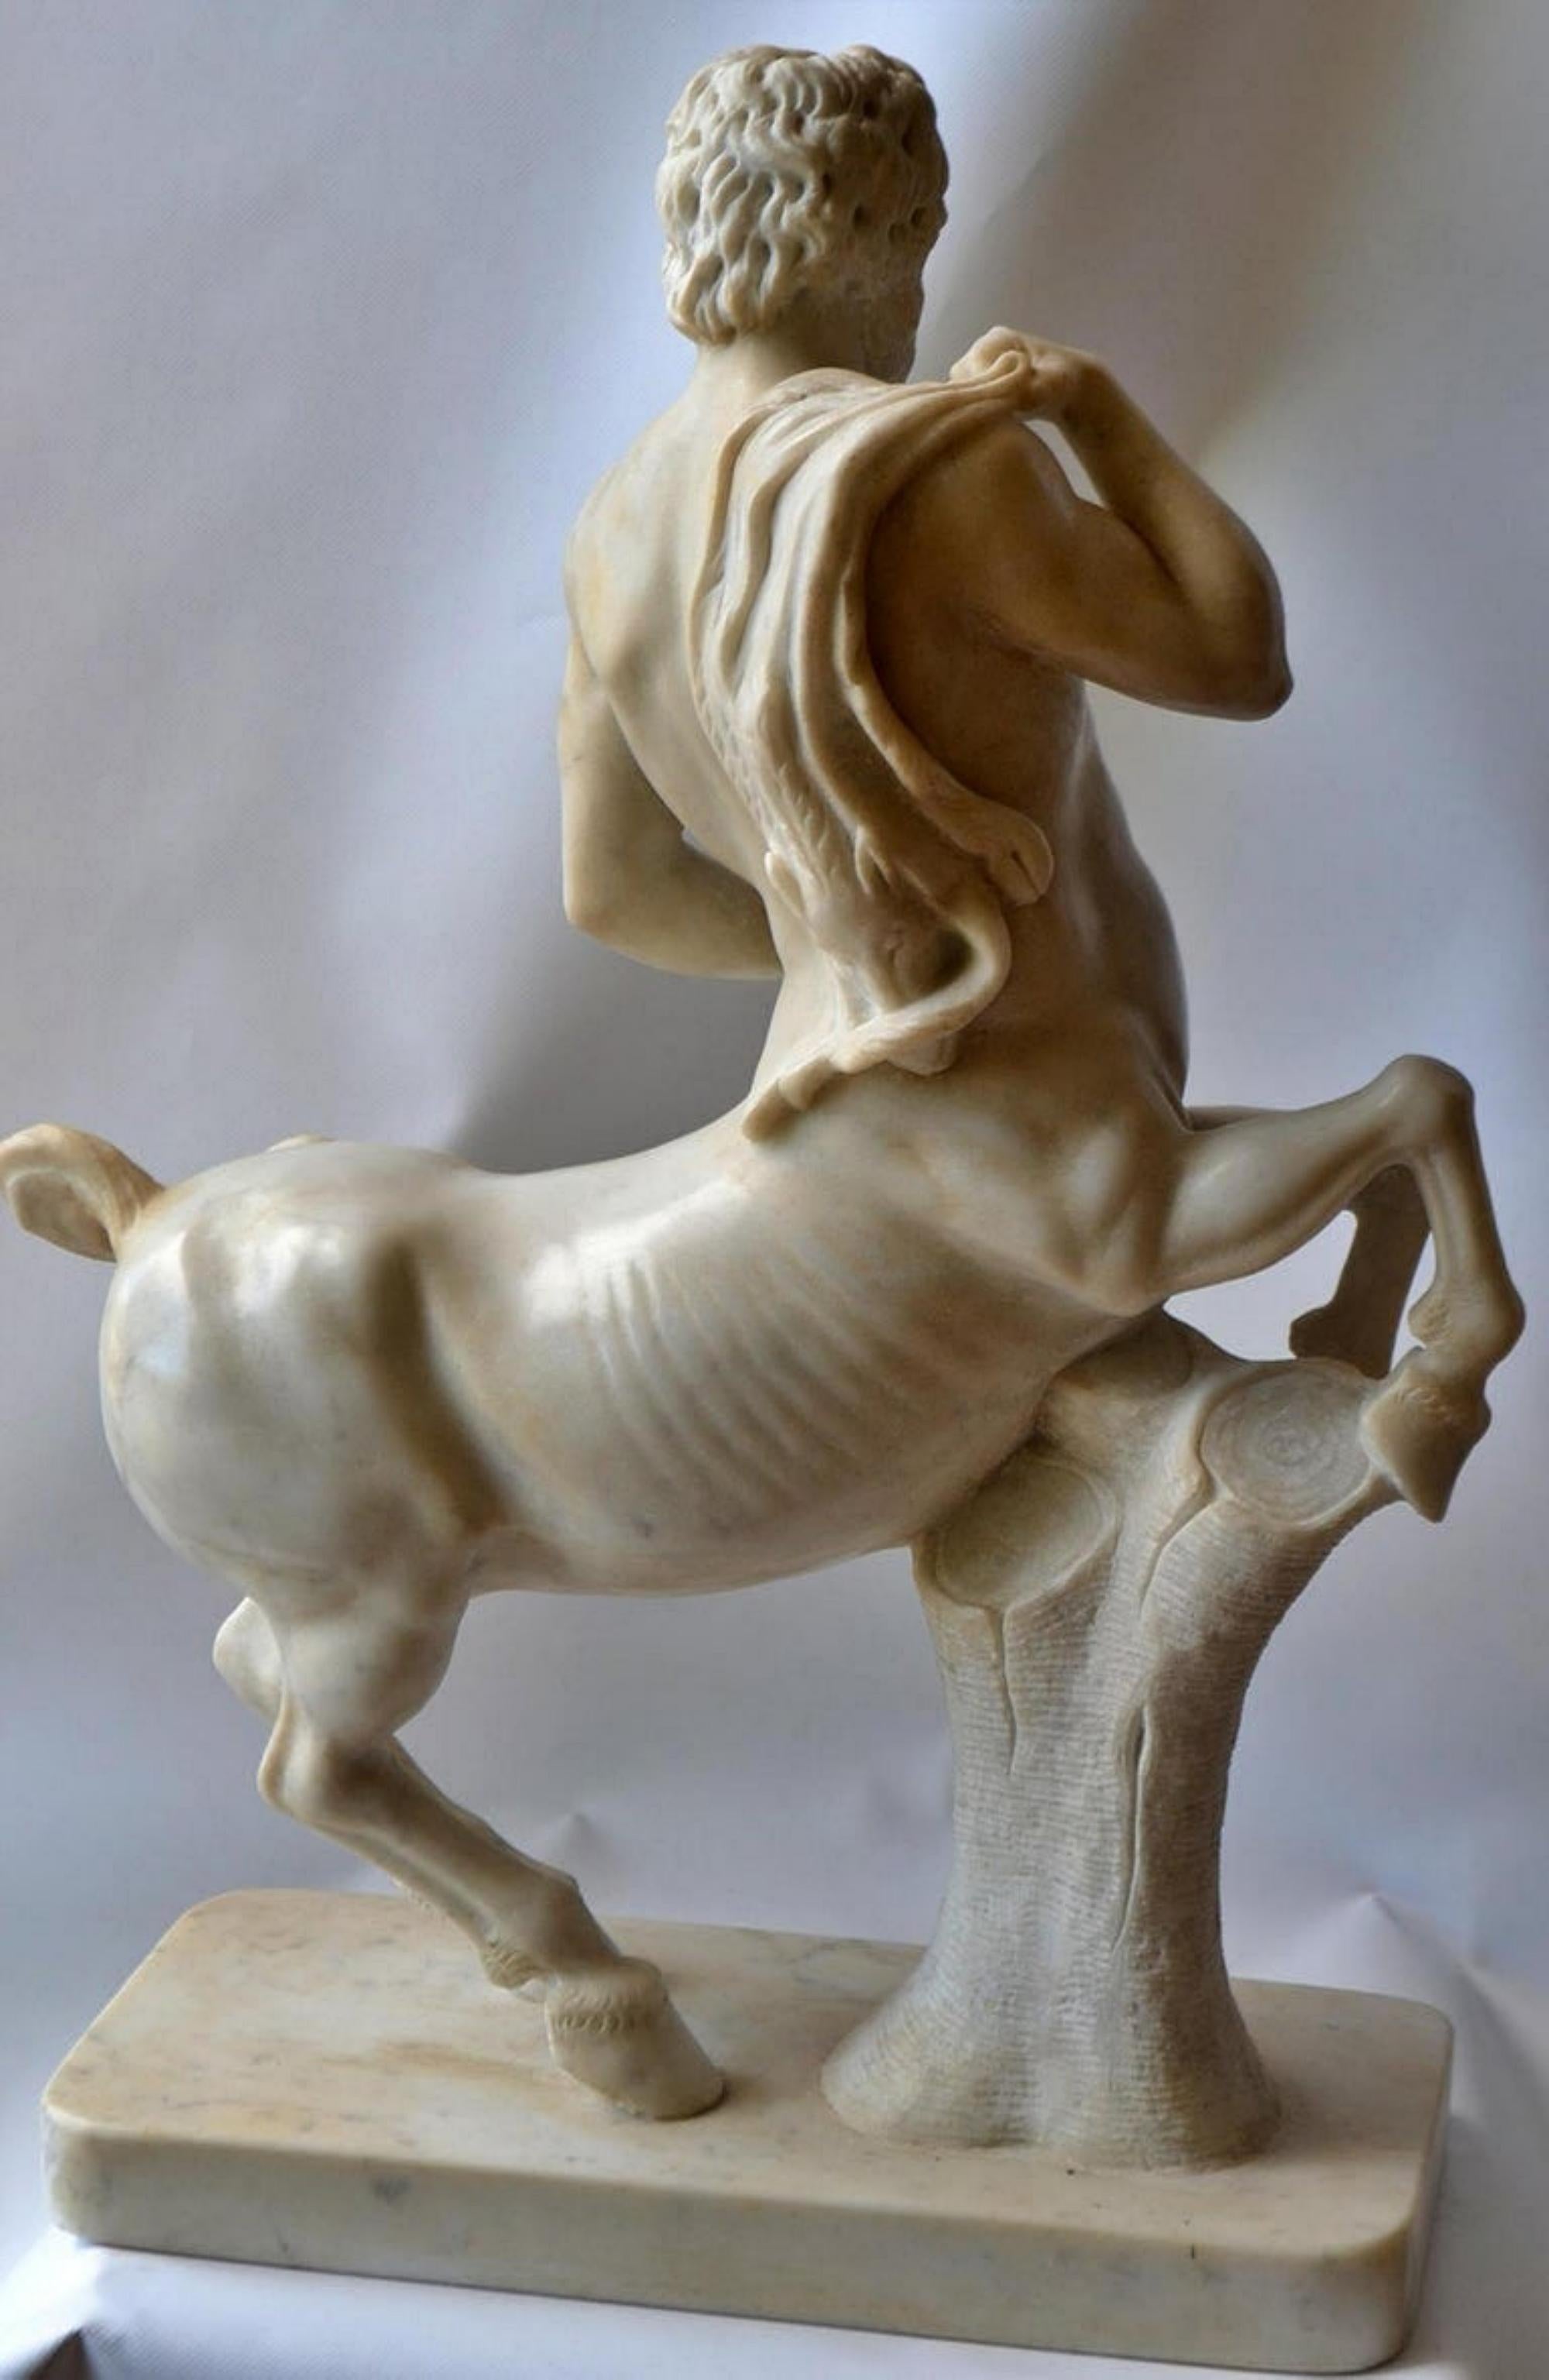 Unique Italian Centaur Sculpture Carved in Carrara Marble Early 20th Century For Sale 2